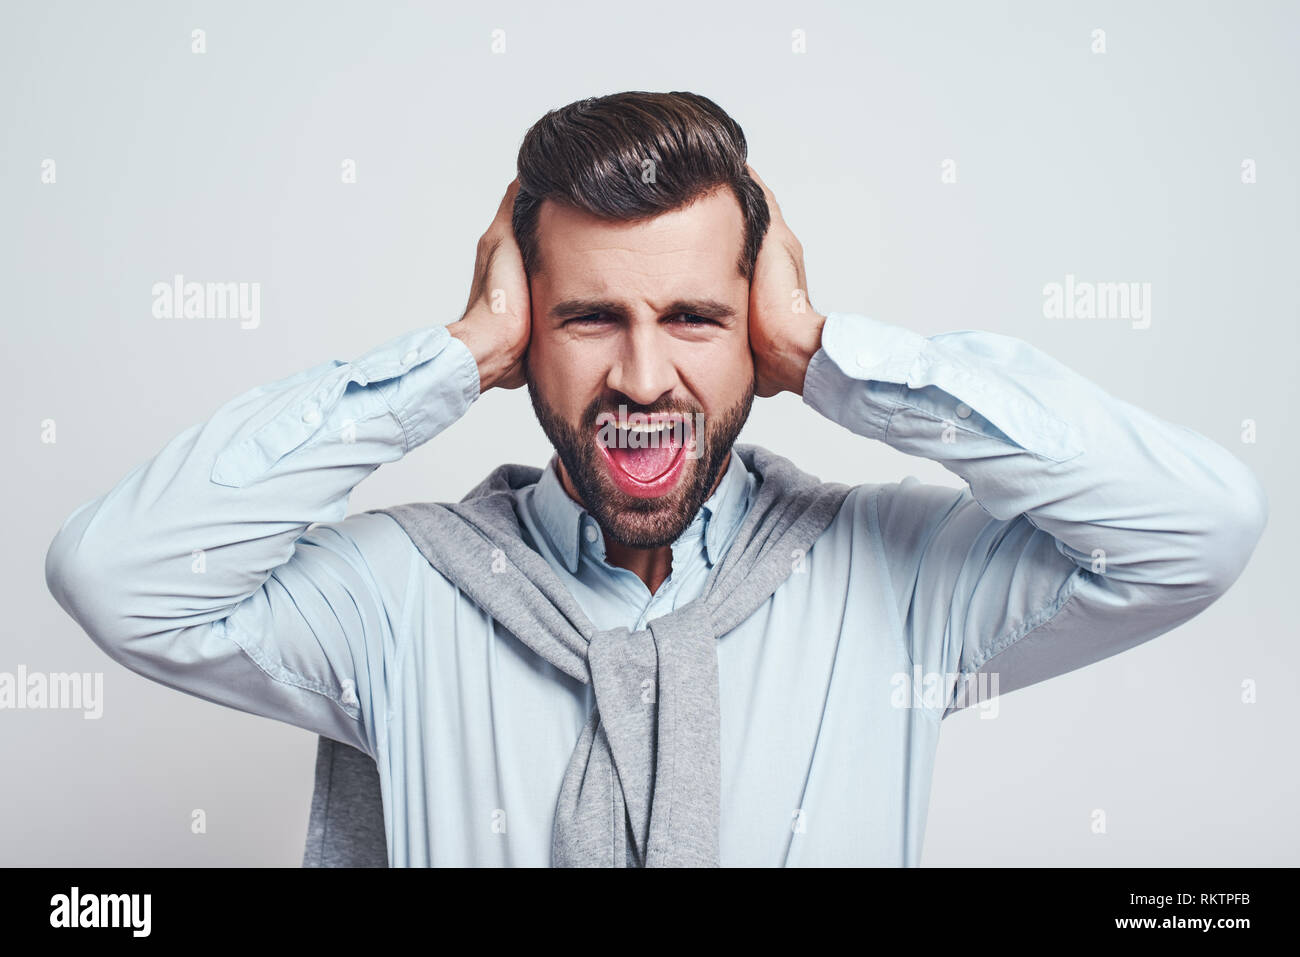 Bla bla bla. Young handsome man is stressed by noise, closing ears with both hands while standing on a grey background. Stress emotion. Stock Photo